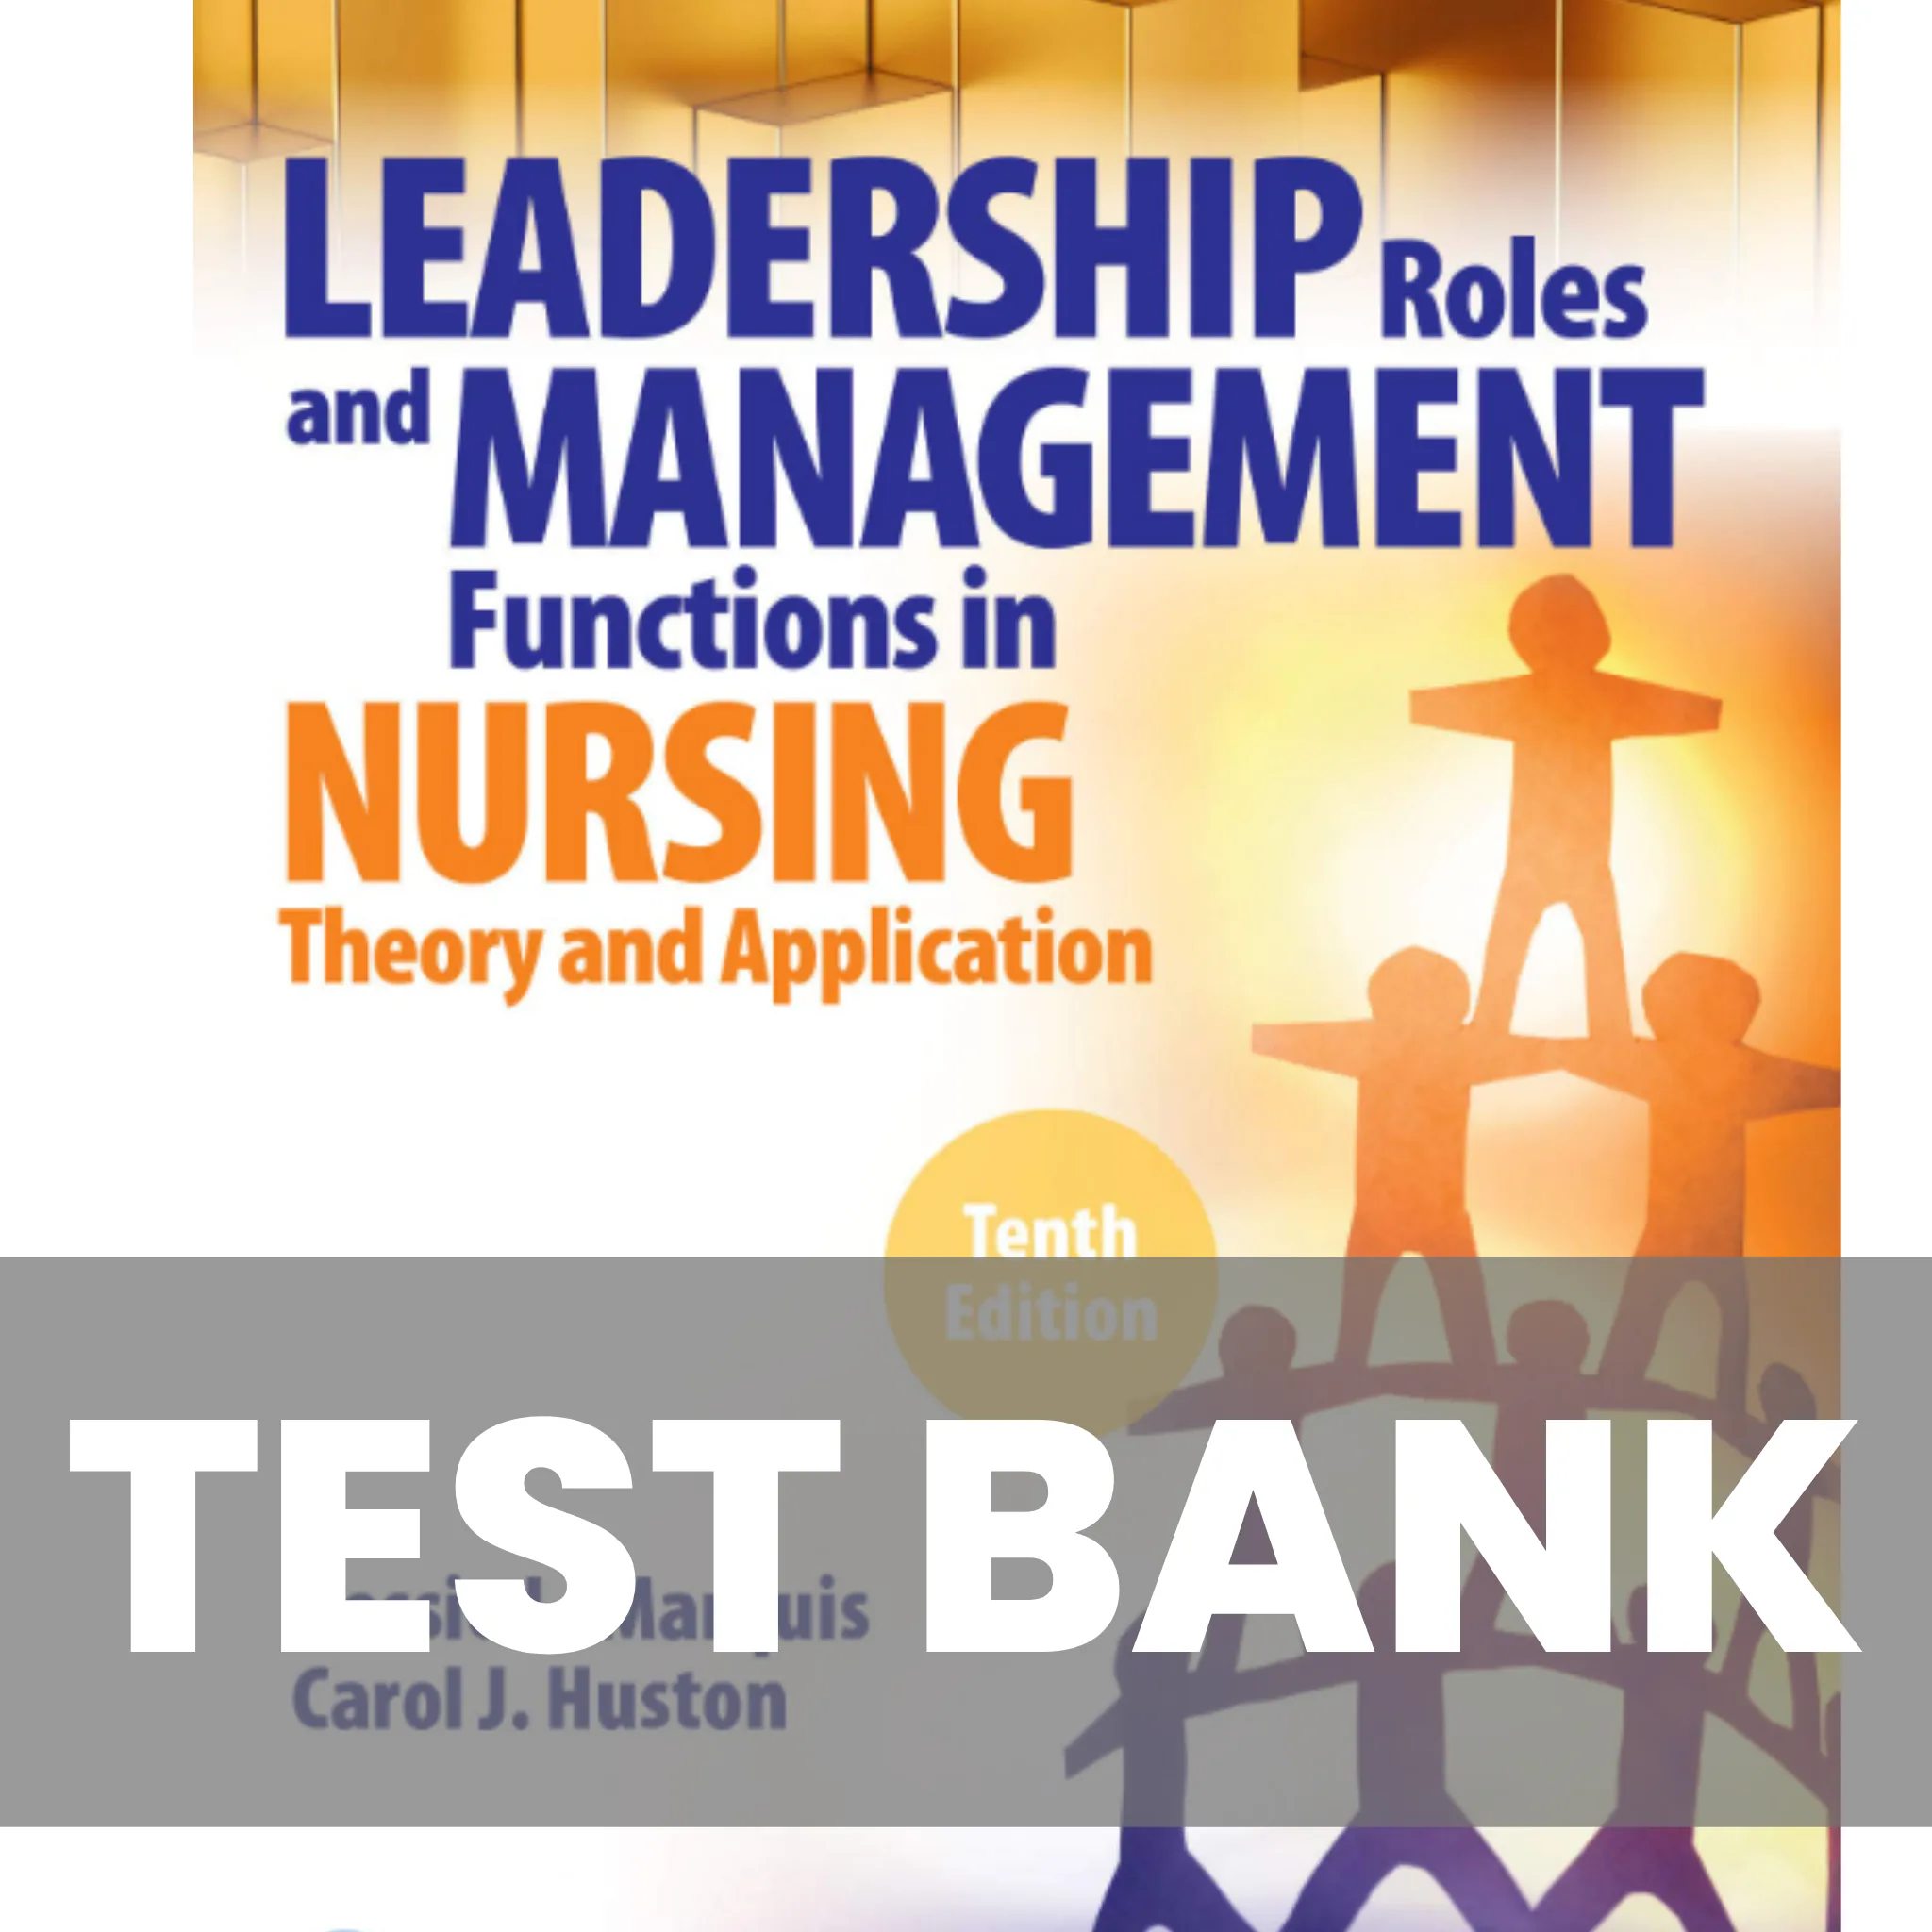 Leadership roles and management functions associated with the